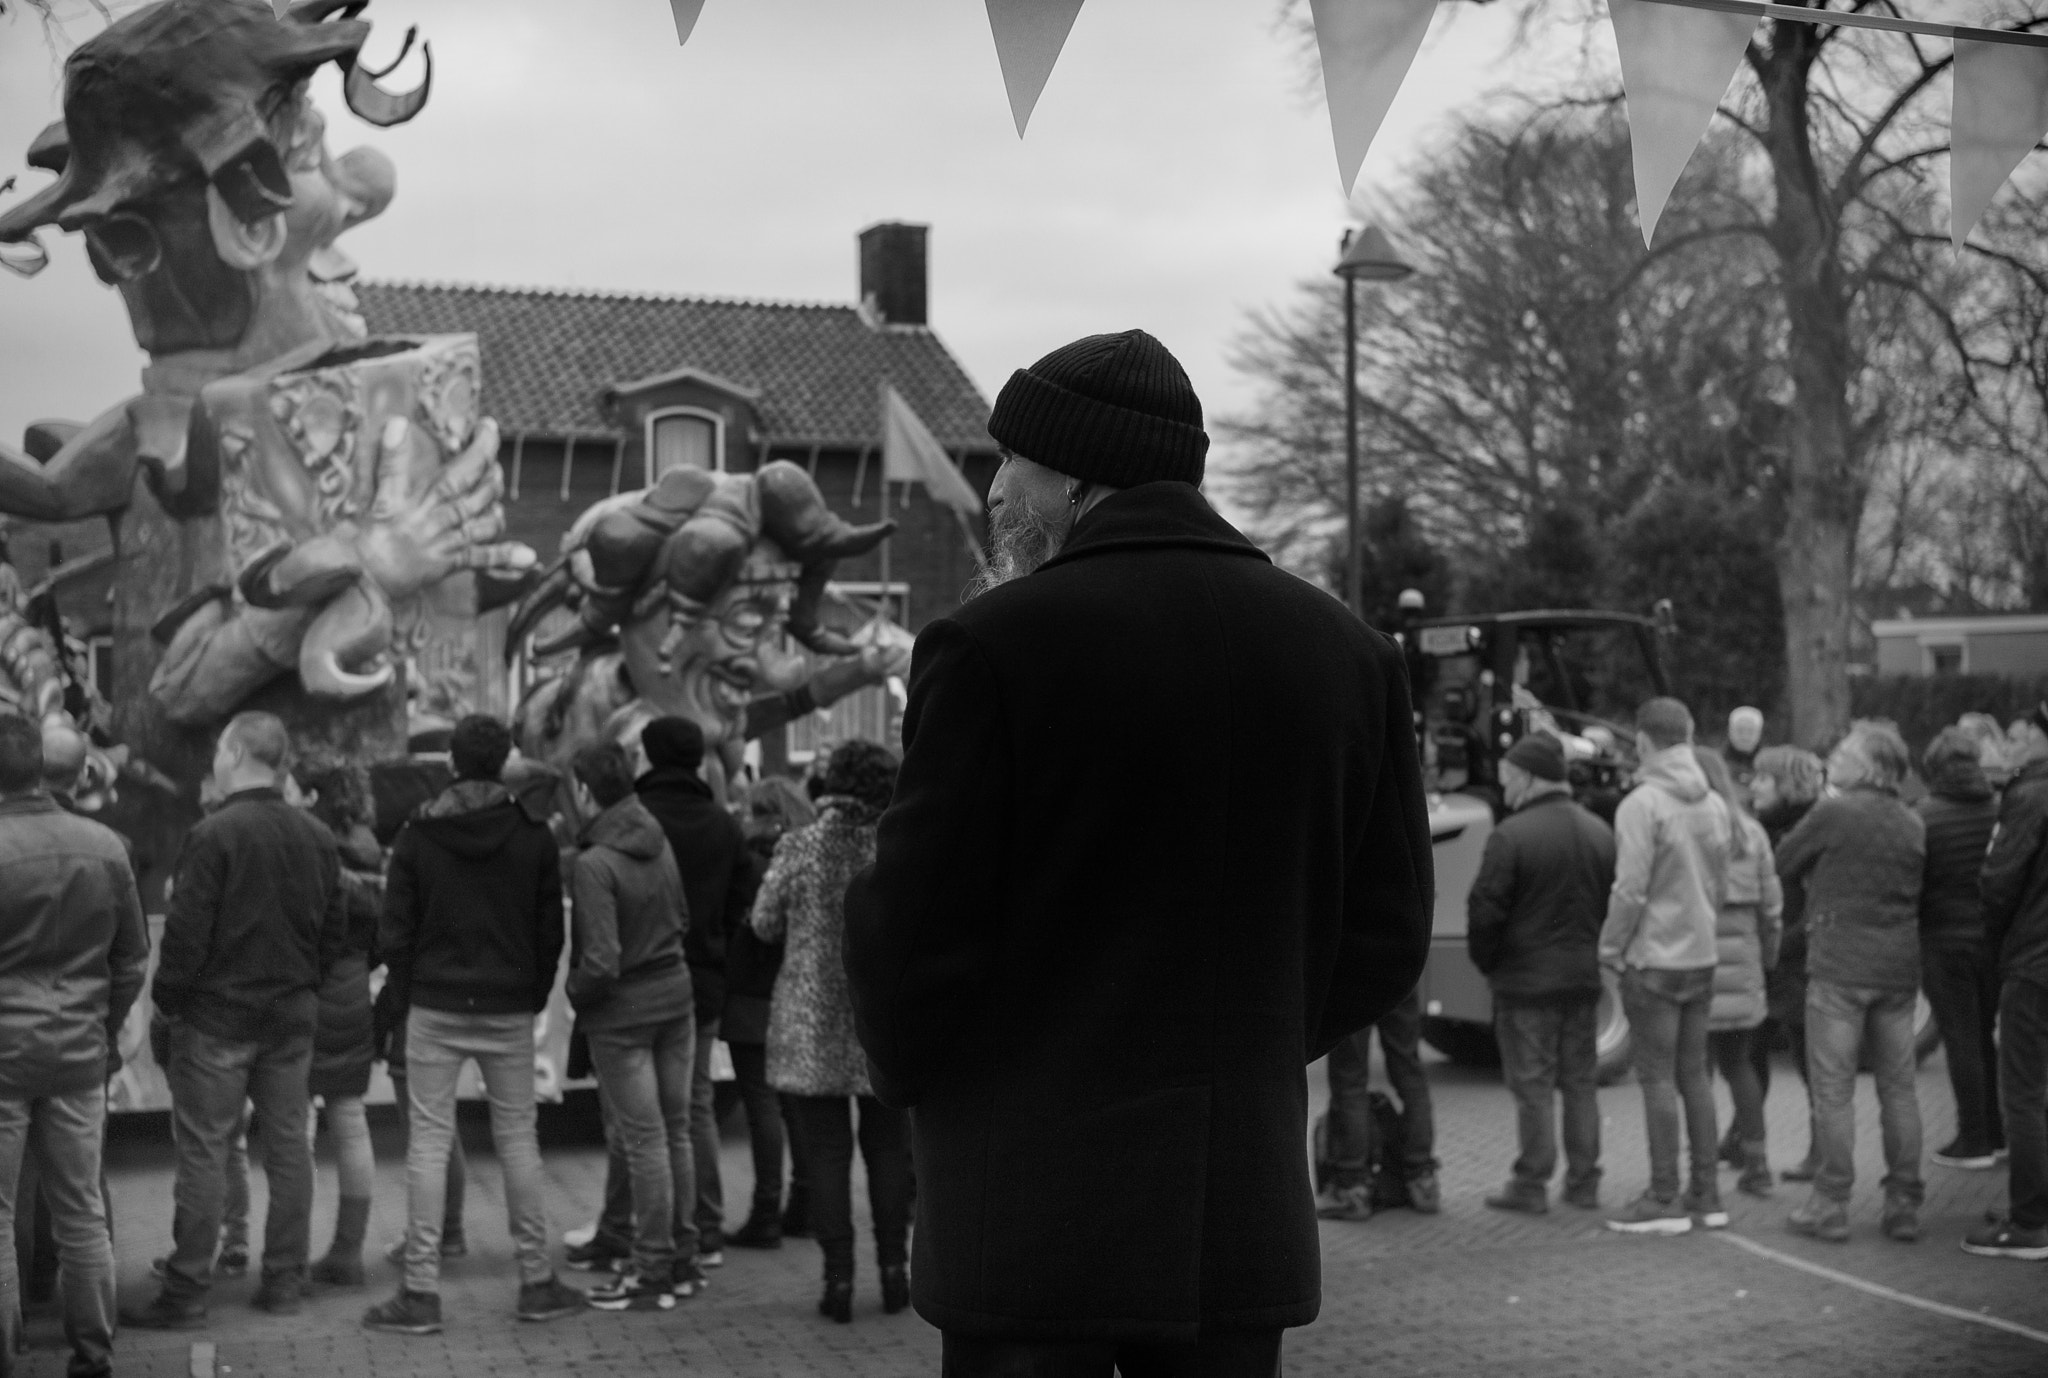 Leica M8 sample photo. Carnaval in braamt, the netherlands photography